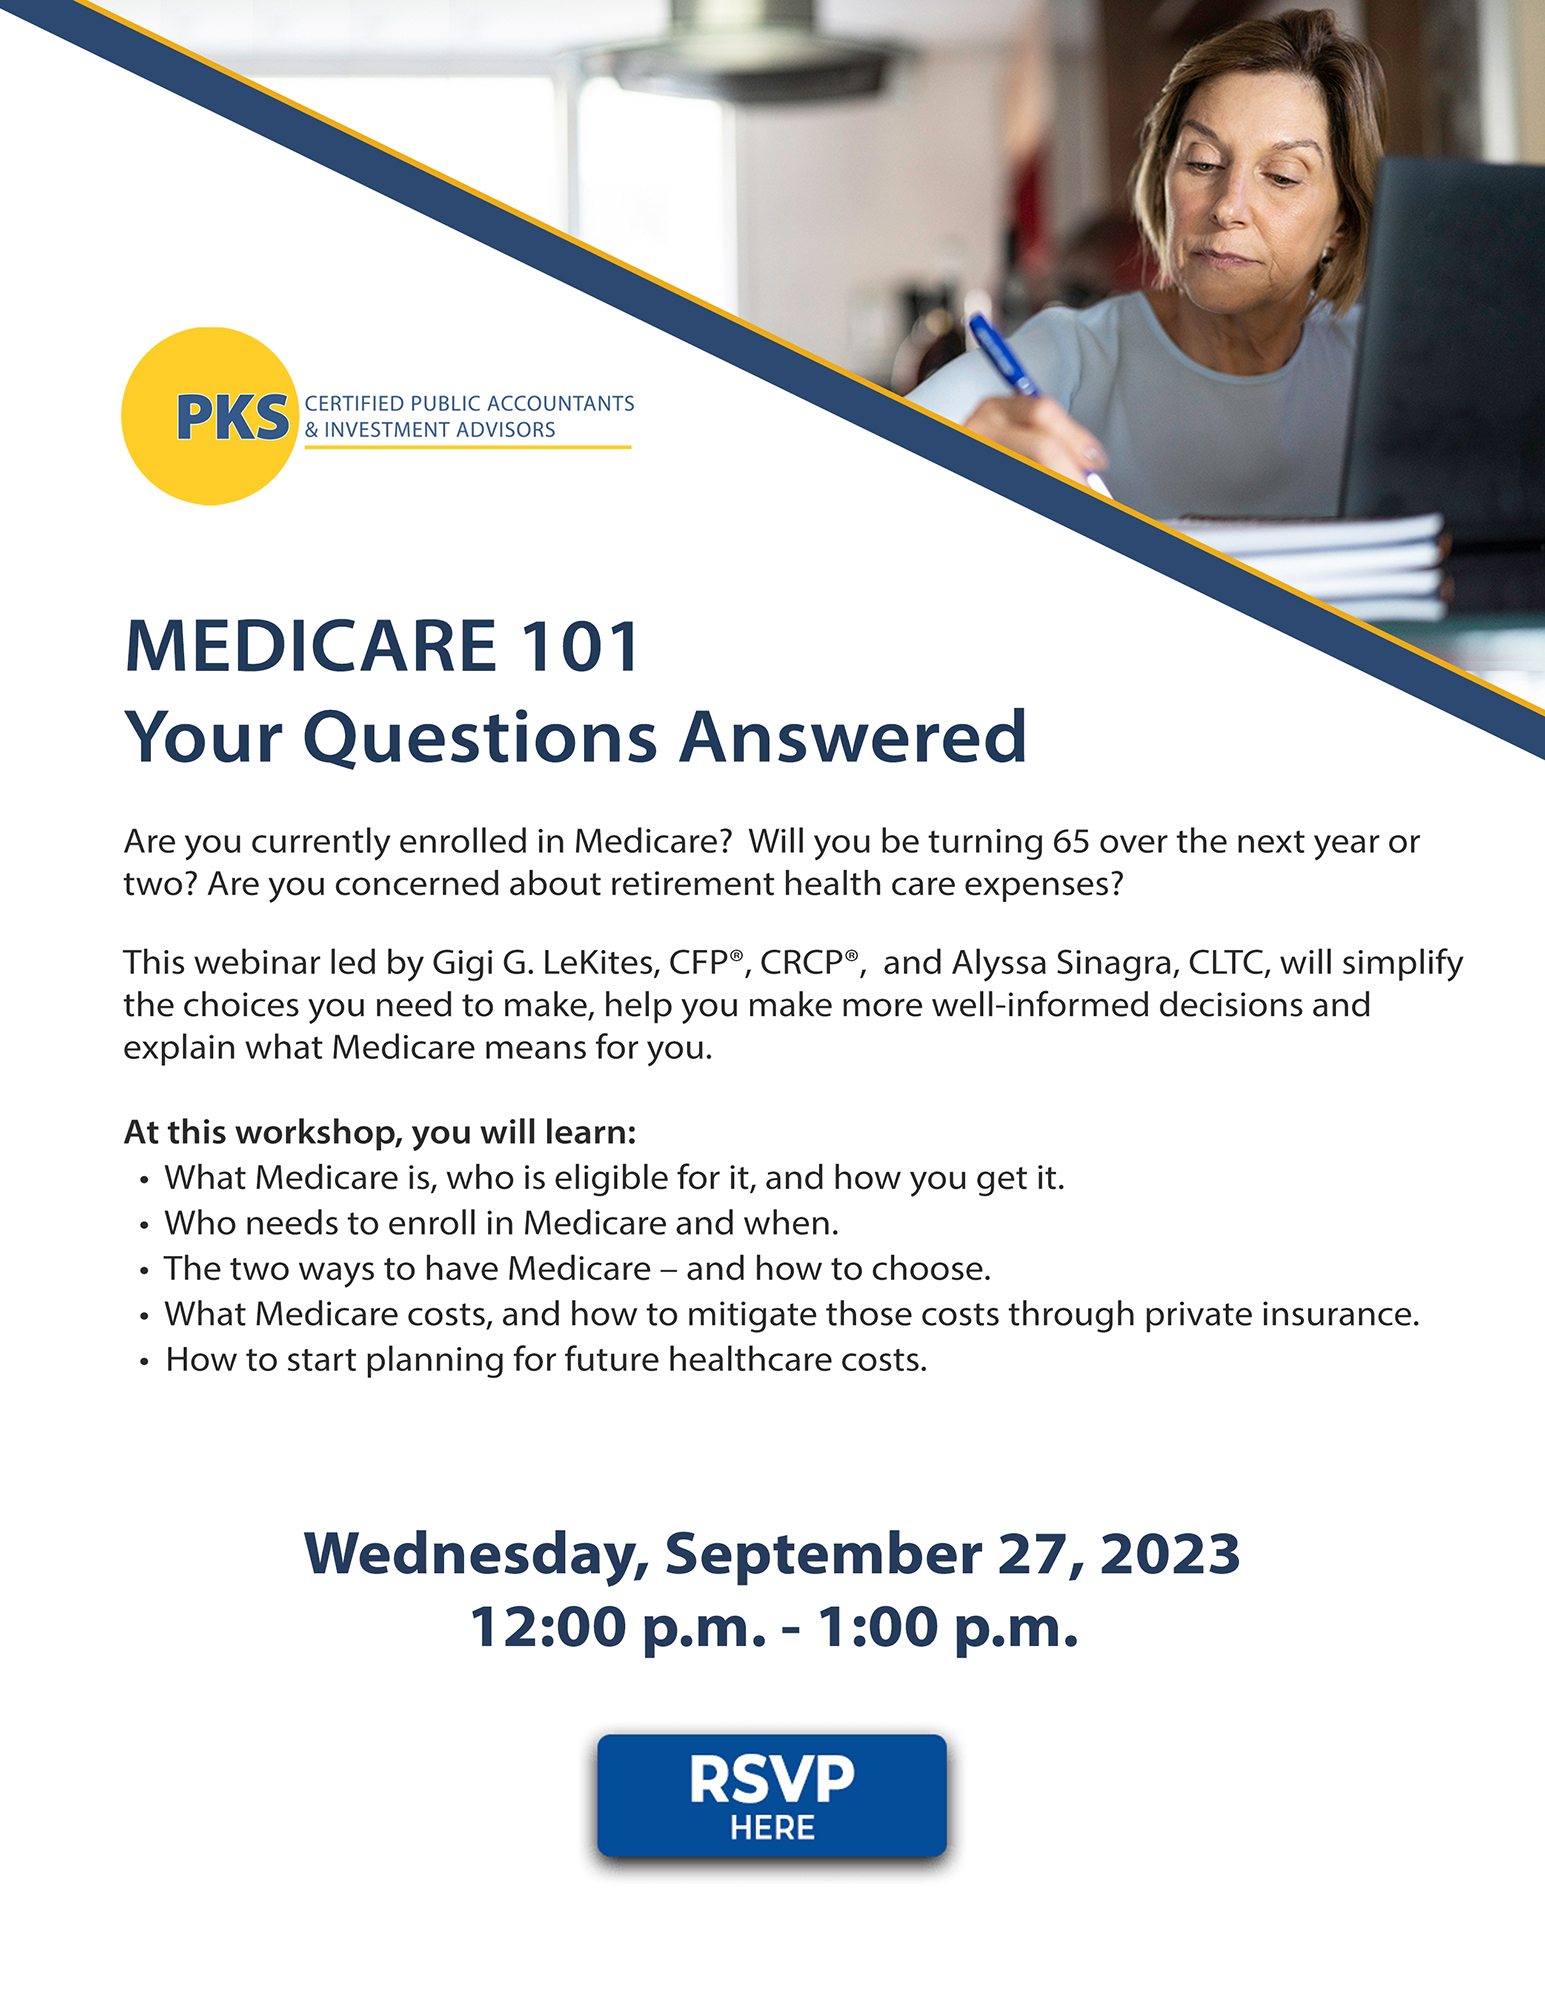 Webinar: MEDICARE 101 - Your Questions Answered